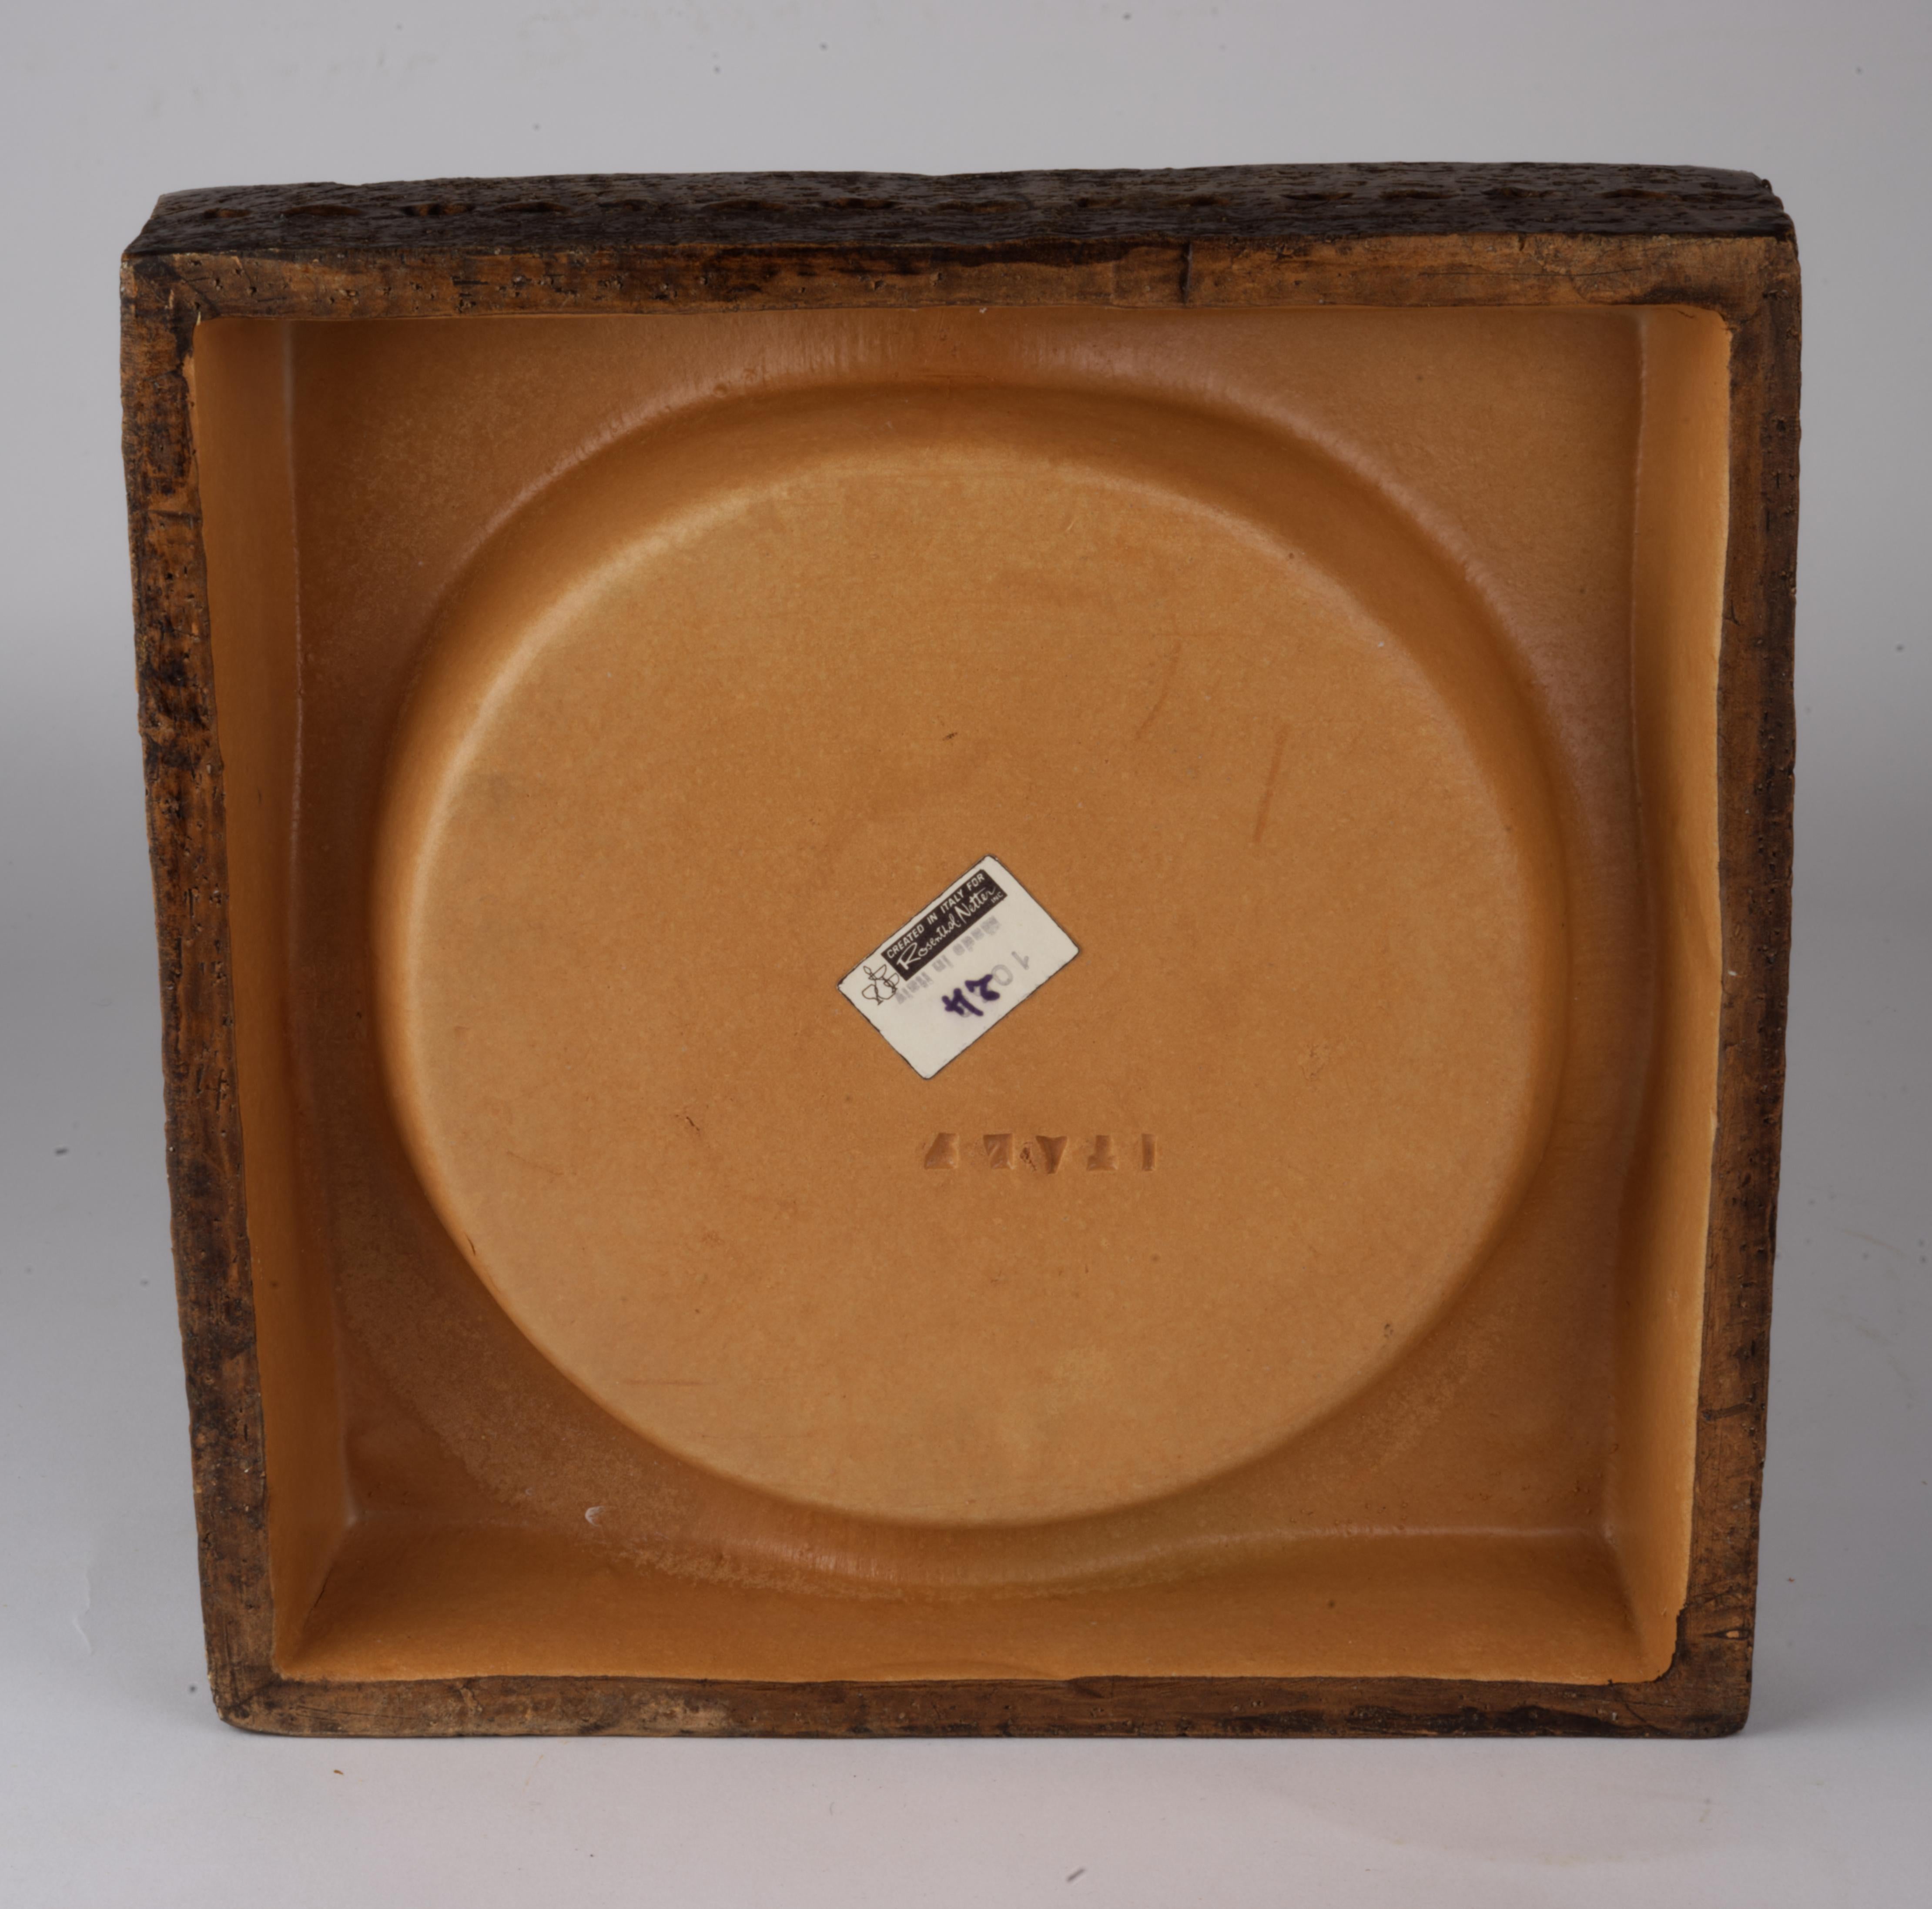 Bitossi for Rosenthal Netter Ceramic Ashtray Catch All In Good Condition For Sale In Clifton Springs, NY